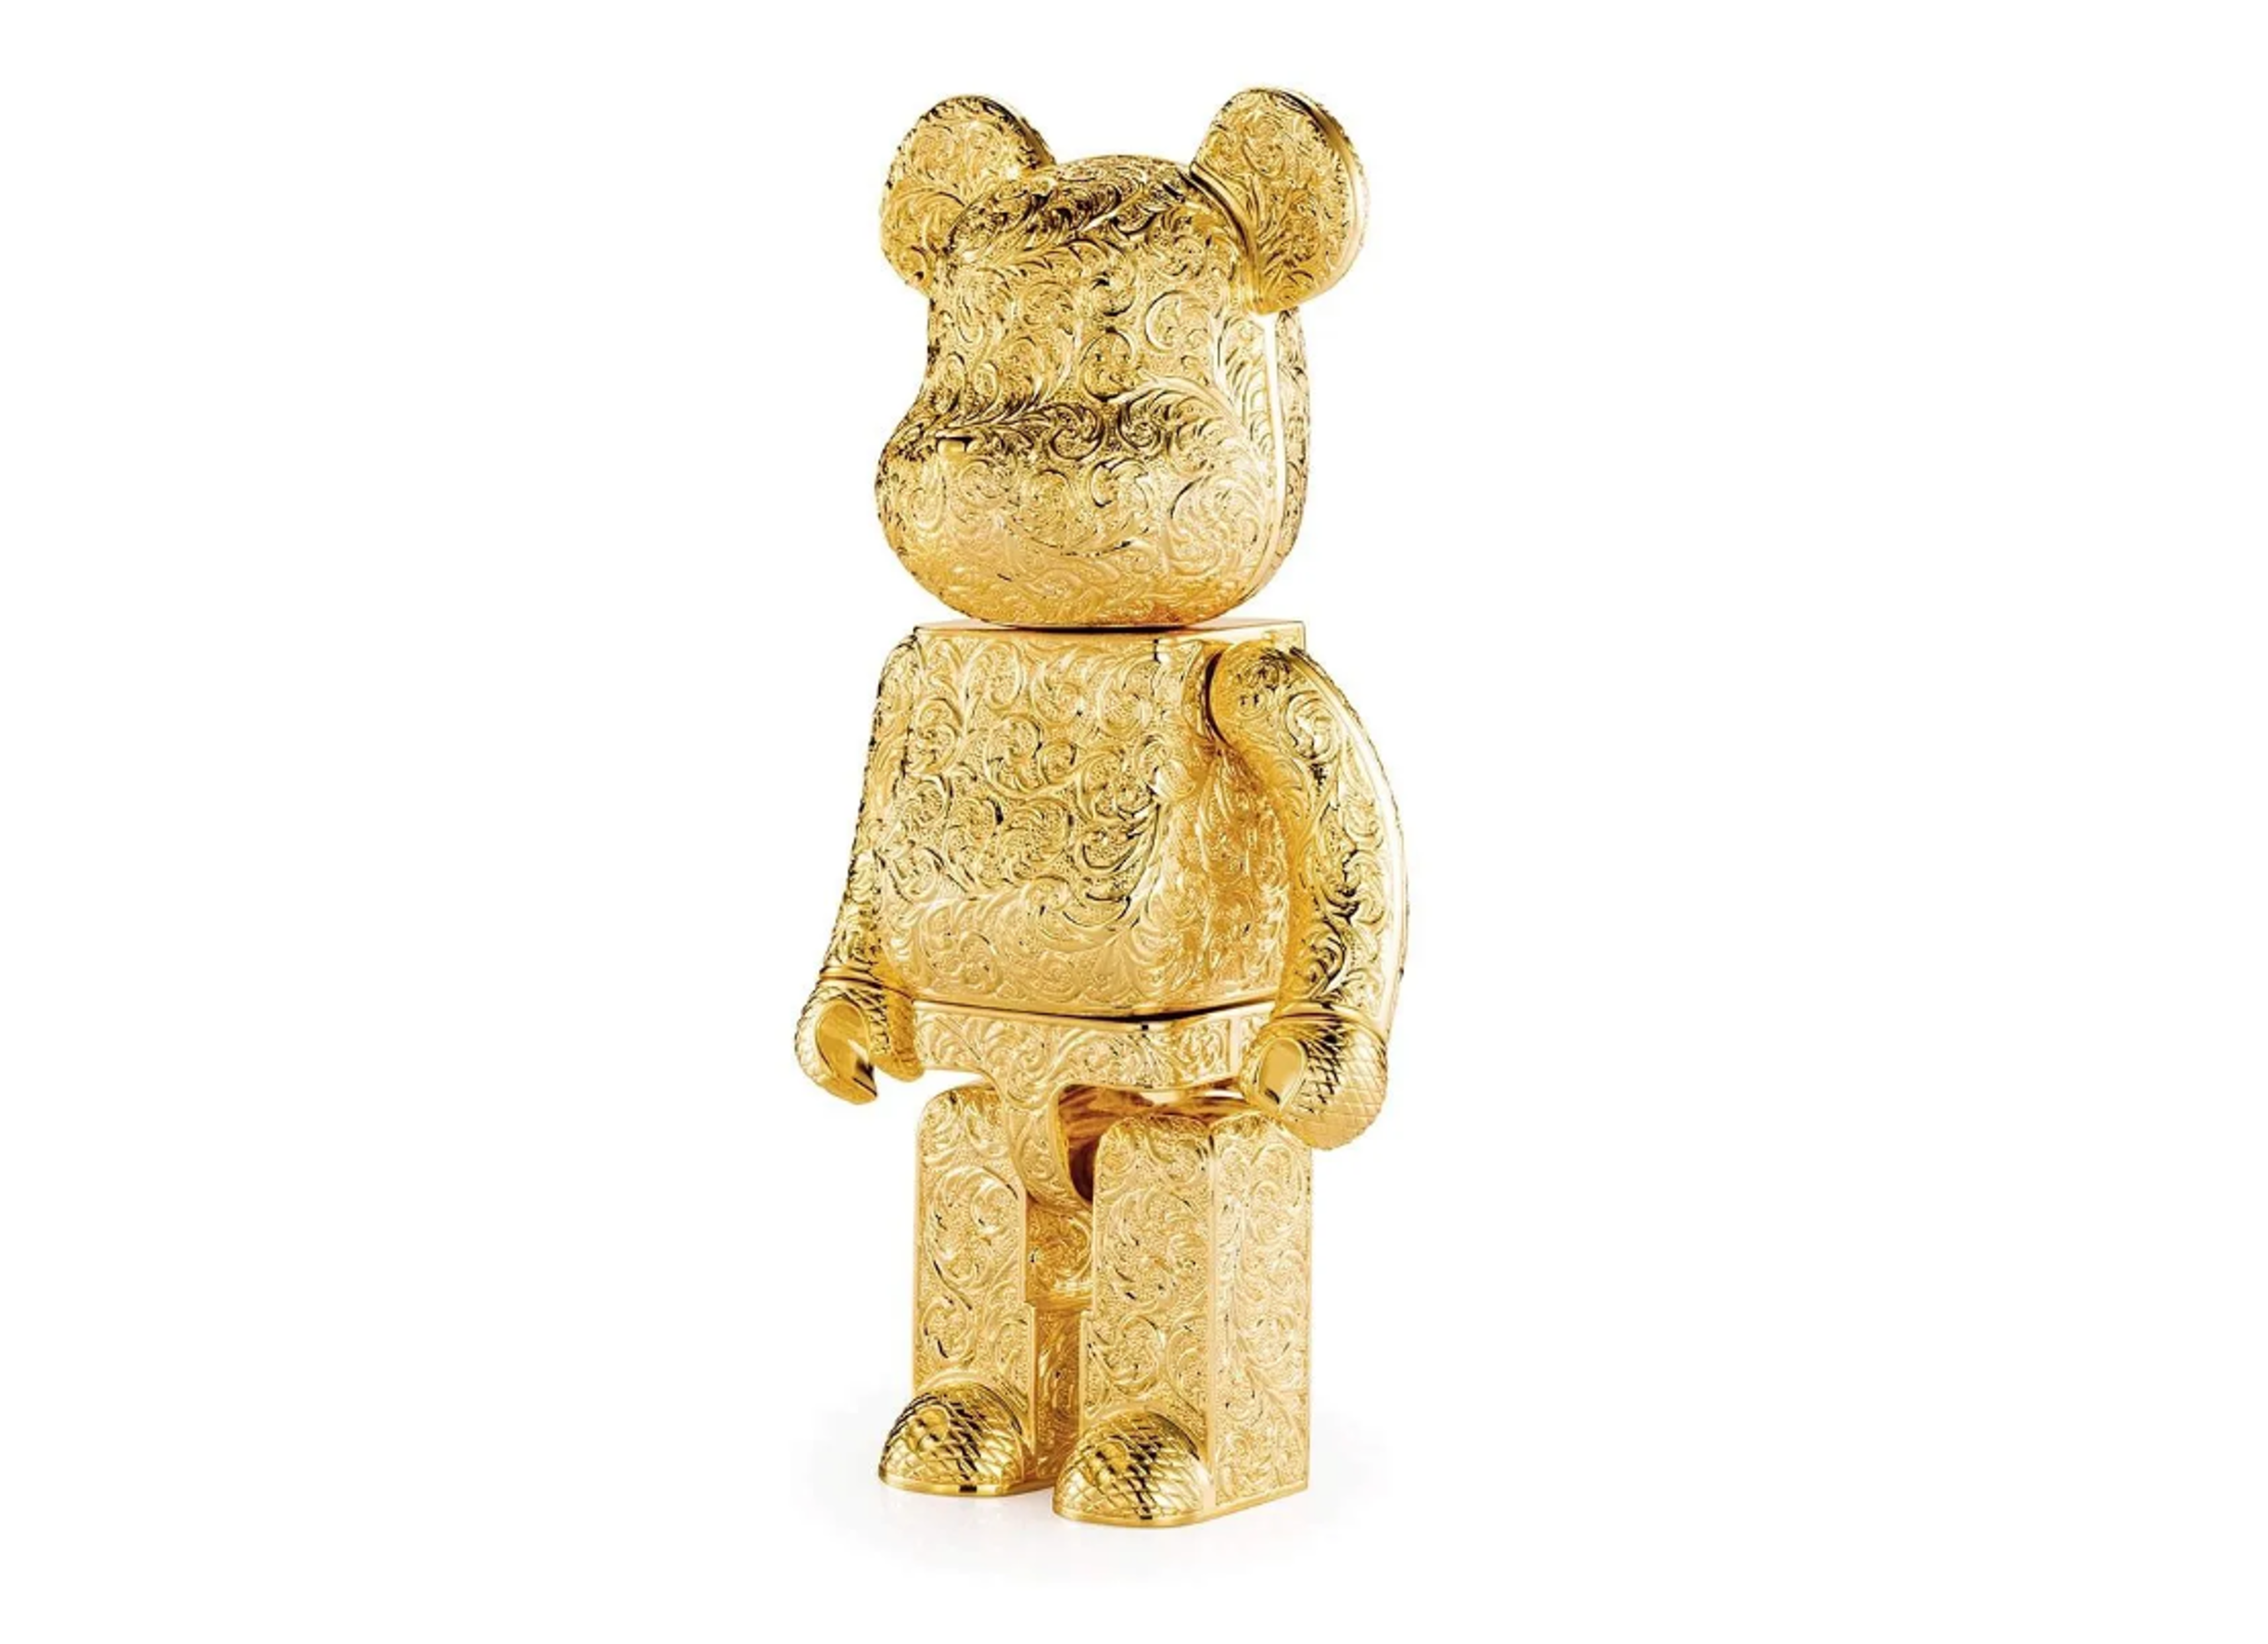 Alternate View 3 of Special Edition Arabesque Golden BE@RBRICK ROYAL SELANGOR